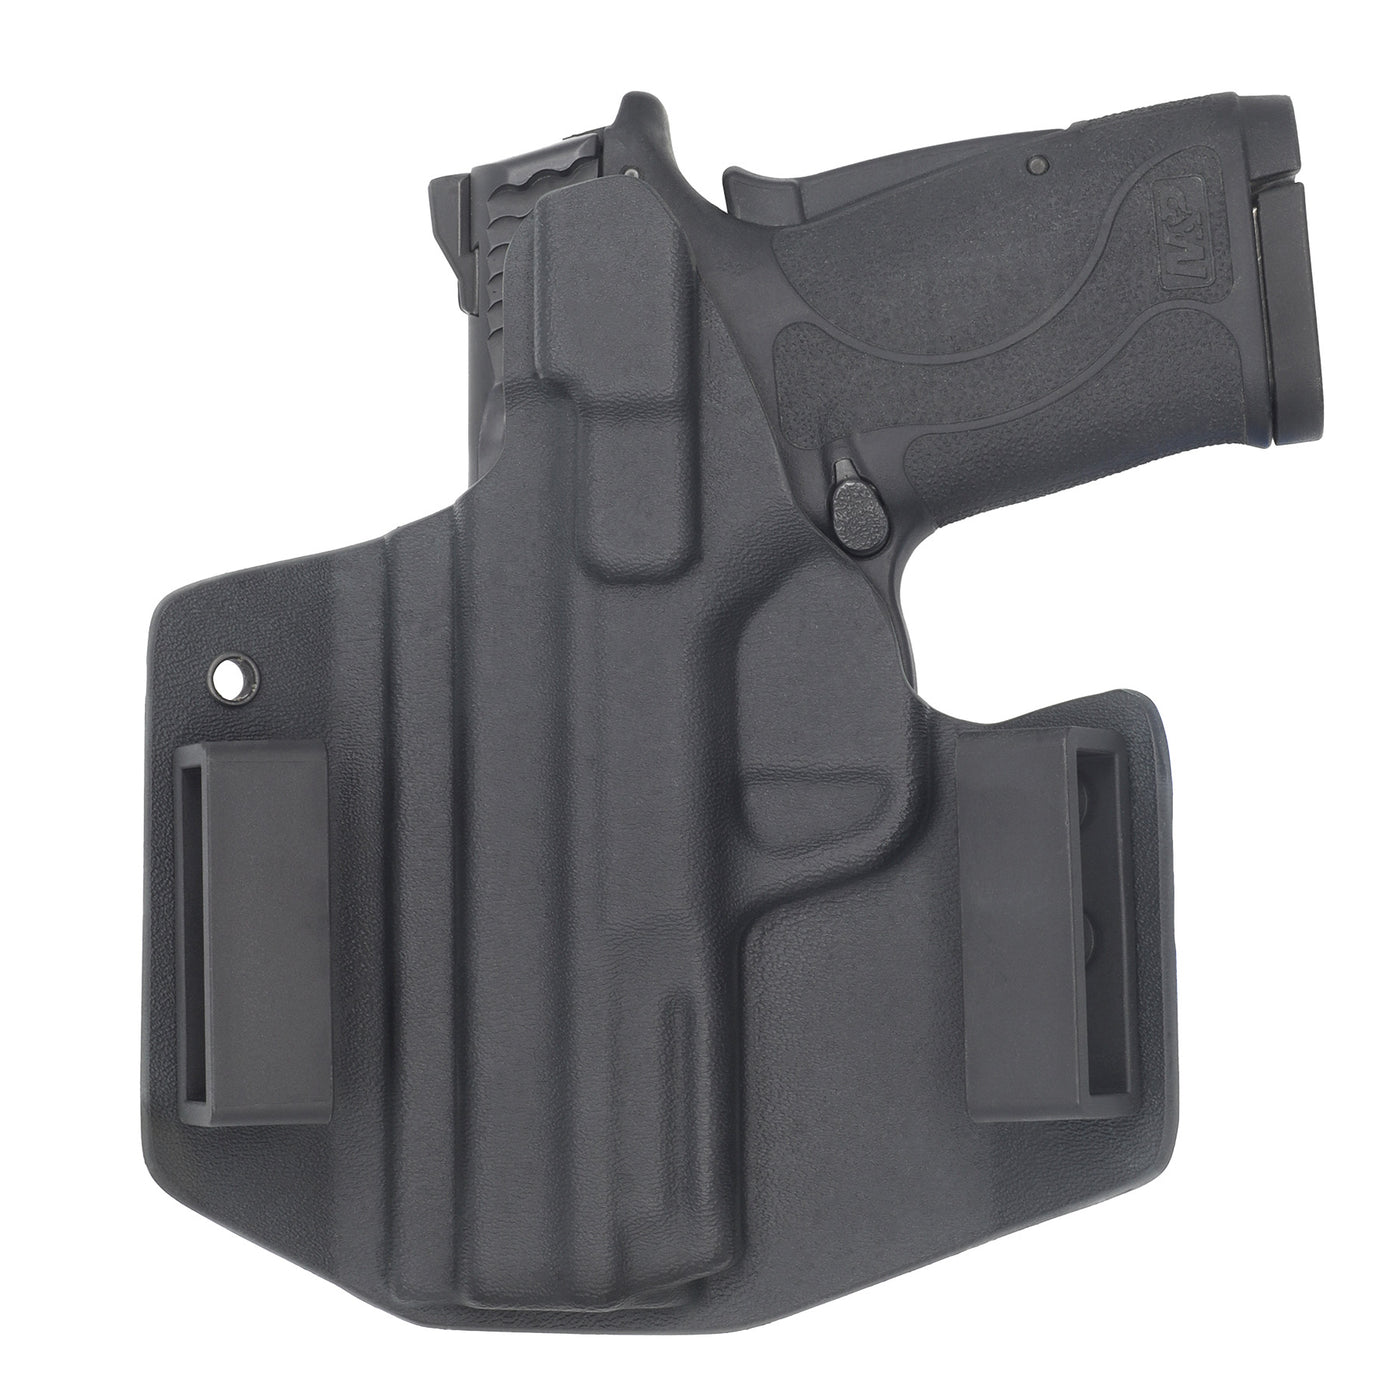 This is a C&G Holsters Covert series Smith & Wesson M&P Shield 380EZ Outside the wasitband holster with the pistol showing a rear view.